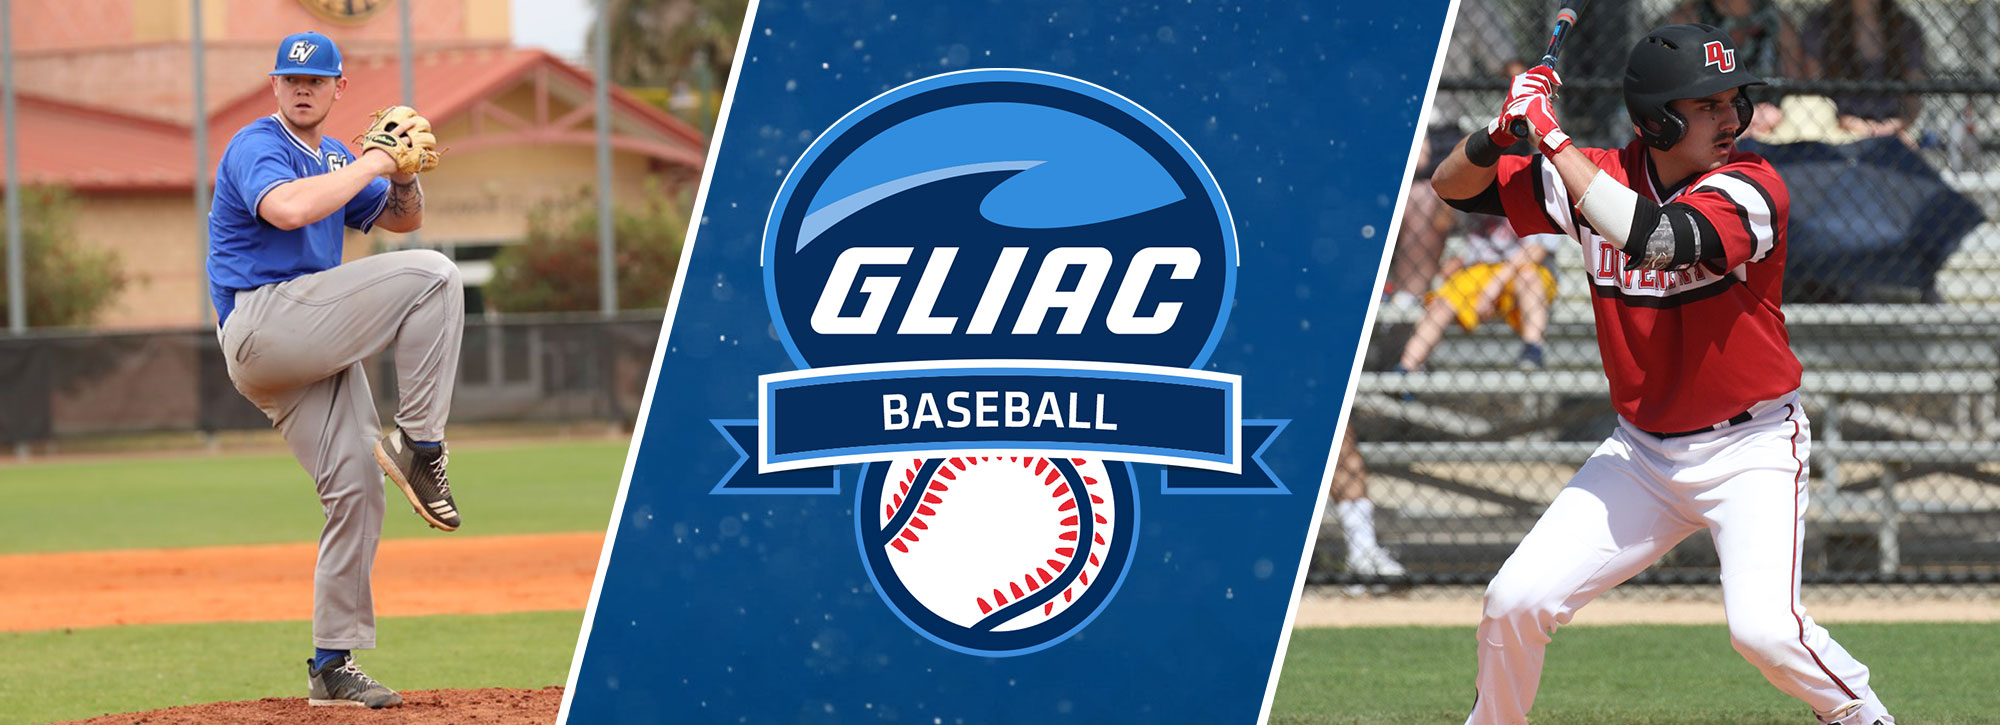 Davenport's Petravicius, Grand Valley State's Smith Selected GLIAC Baseball Players of the Week